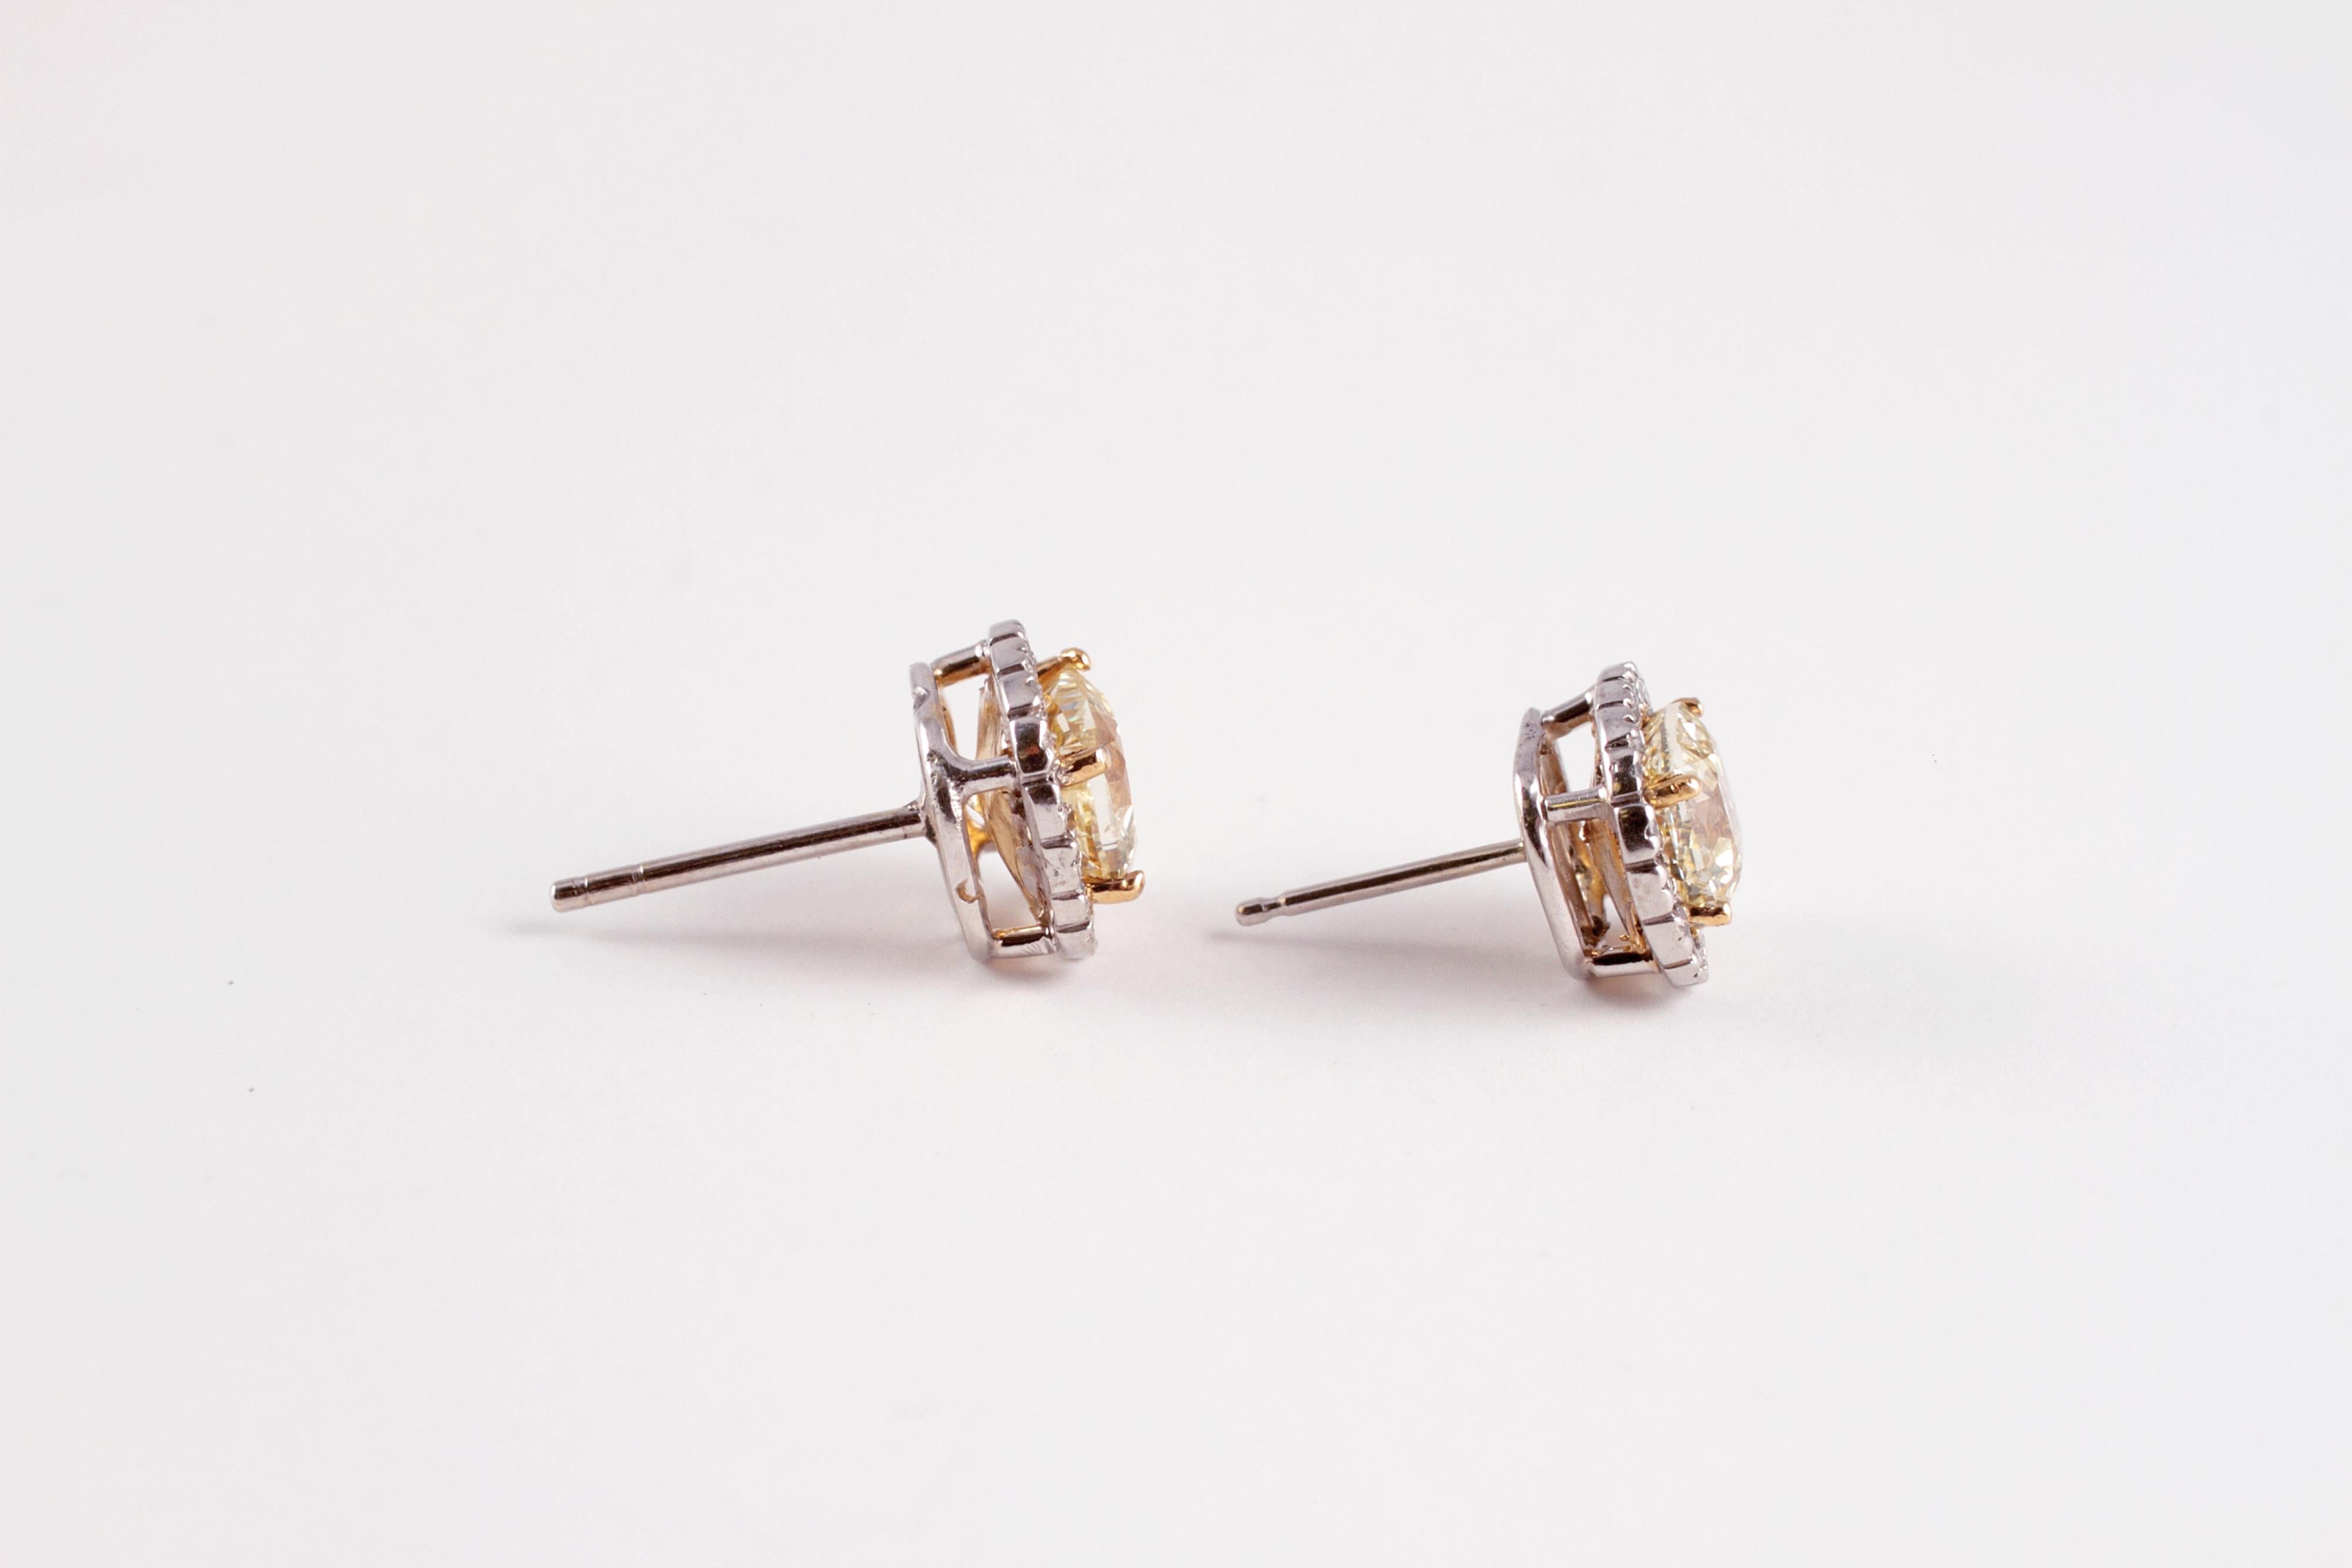 These earrings are composed of lovely white gold mountings, each centered with one cushion-cut fancy light yellow diamond, surrounded by round brilliant diamonds.  Stunning on the ear!!  The fancy color diamonds have a stated total weight of 1.85